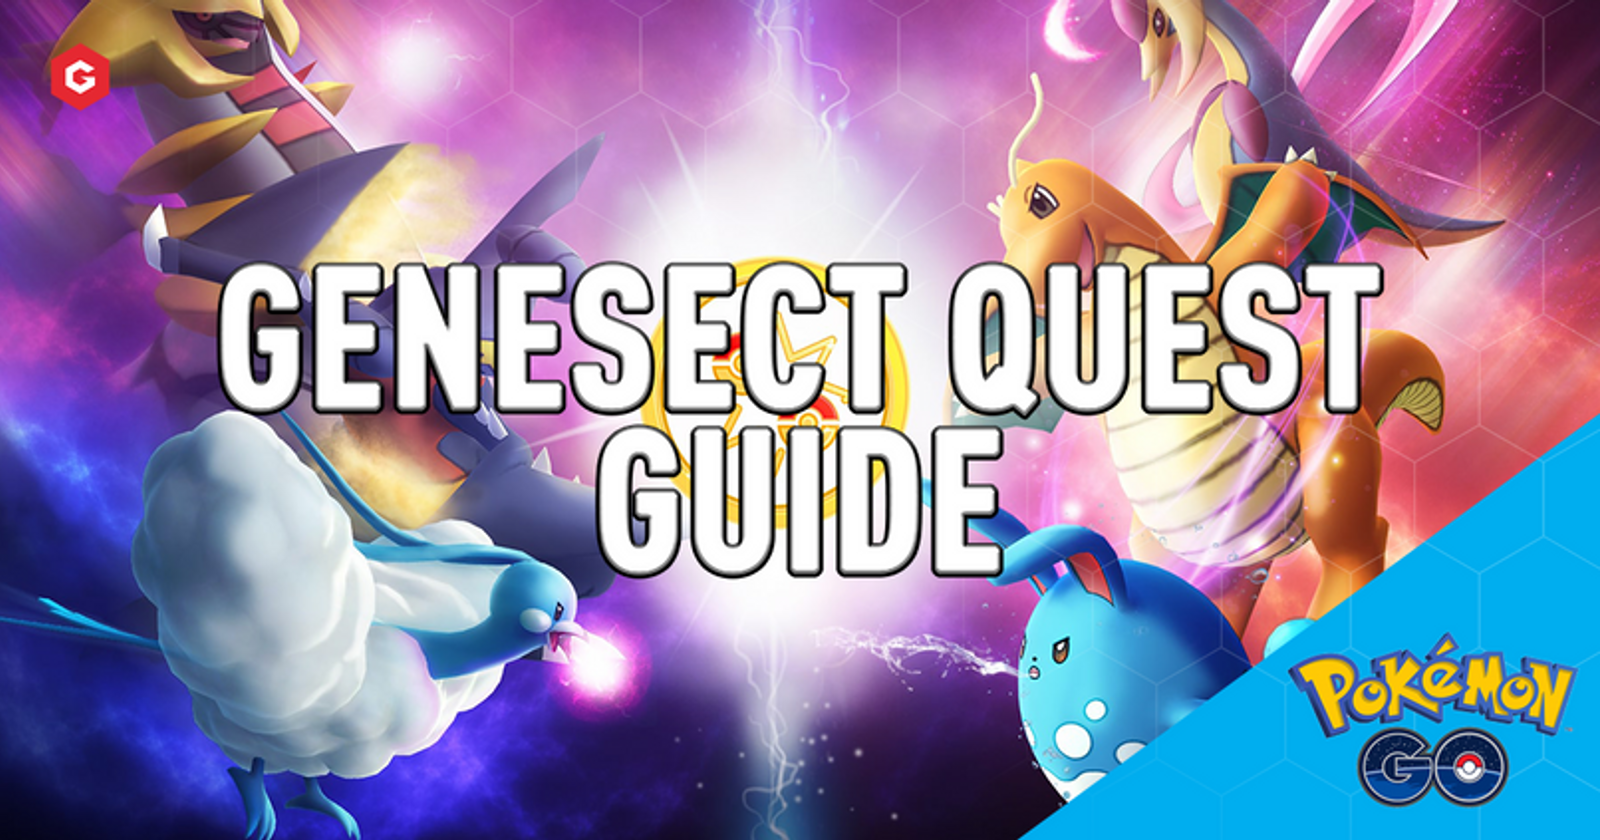 Pokemon Go Genesect Quest: Every step to complete 'A Drive To